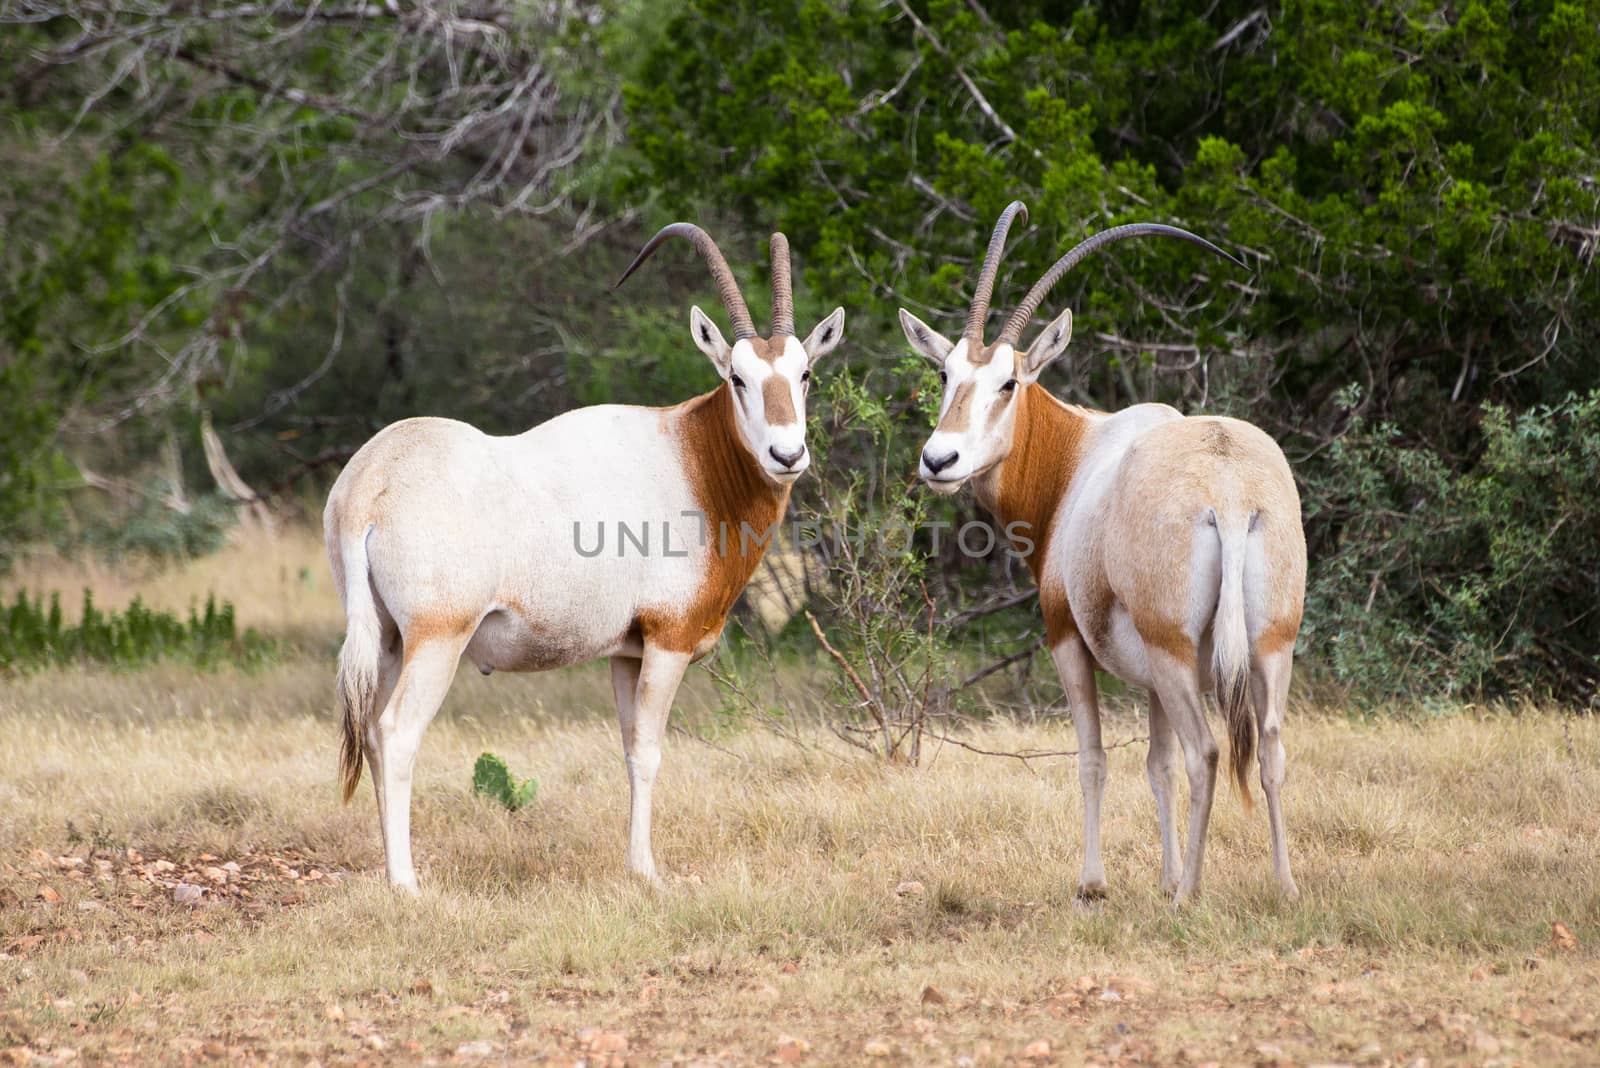 Wild Scimitar Horned Oryx Bull and Cow standing towards eachother. These animals are extinct in their native lands of Africa.